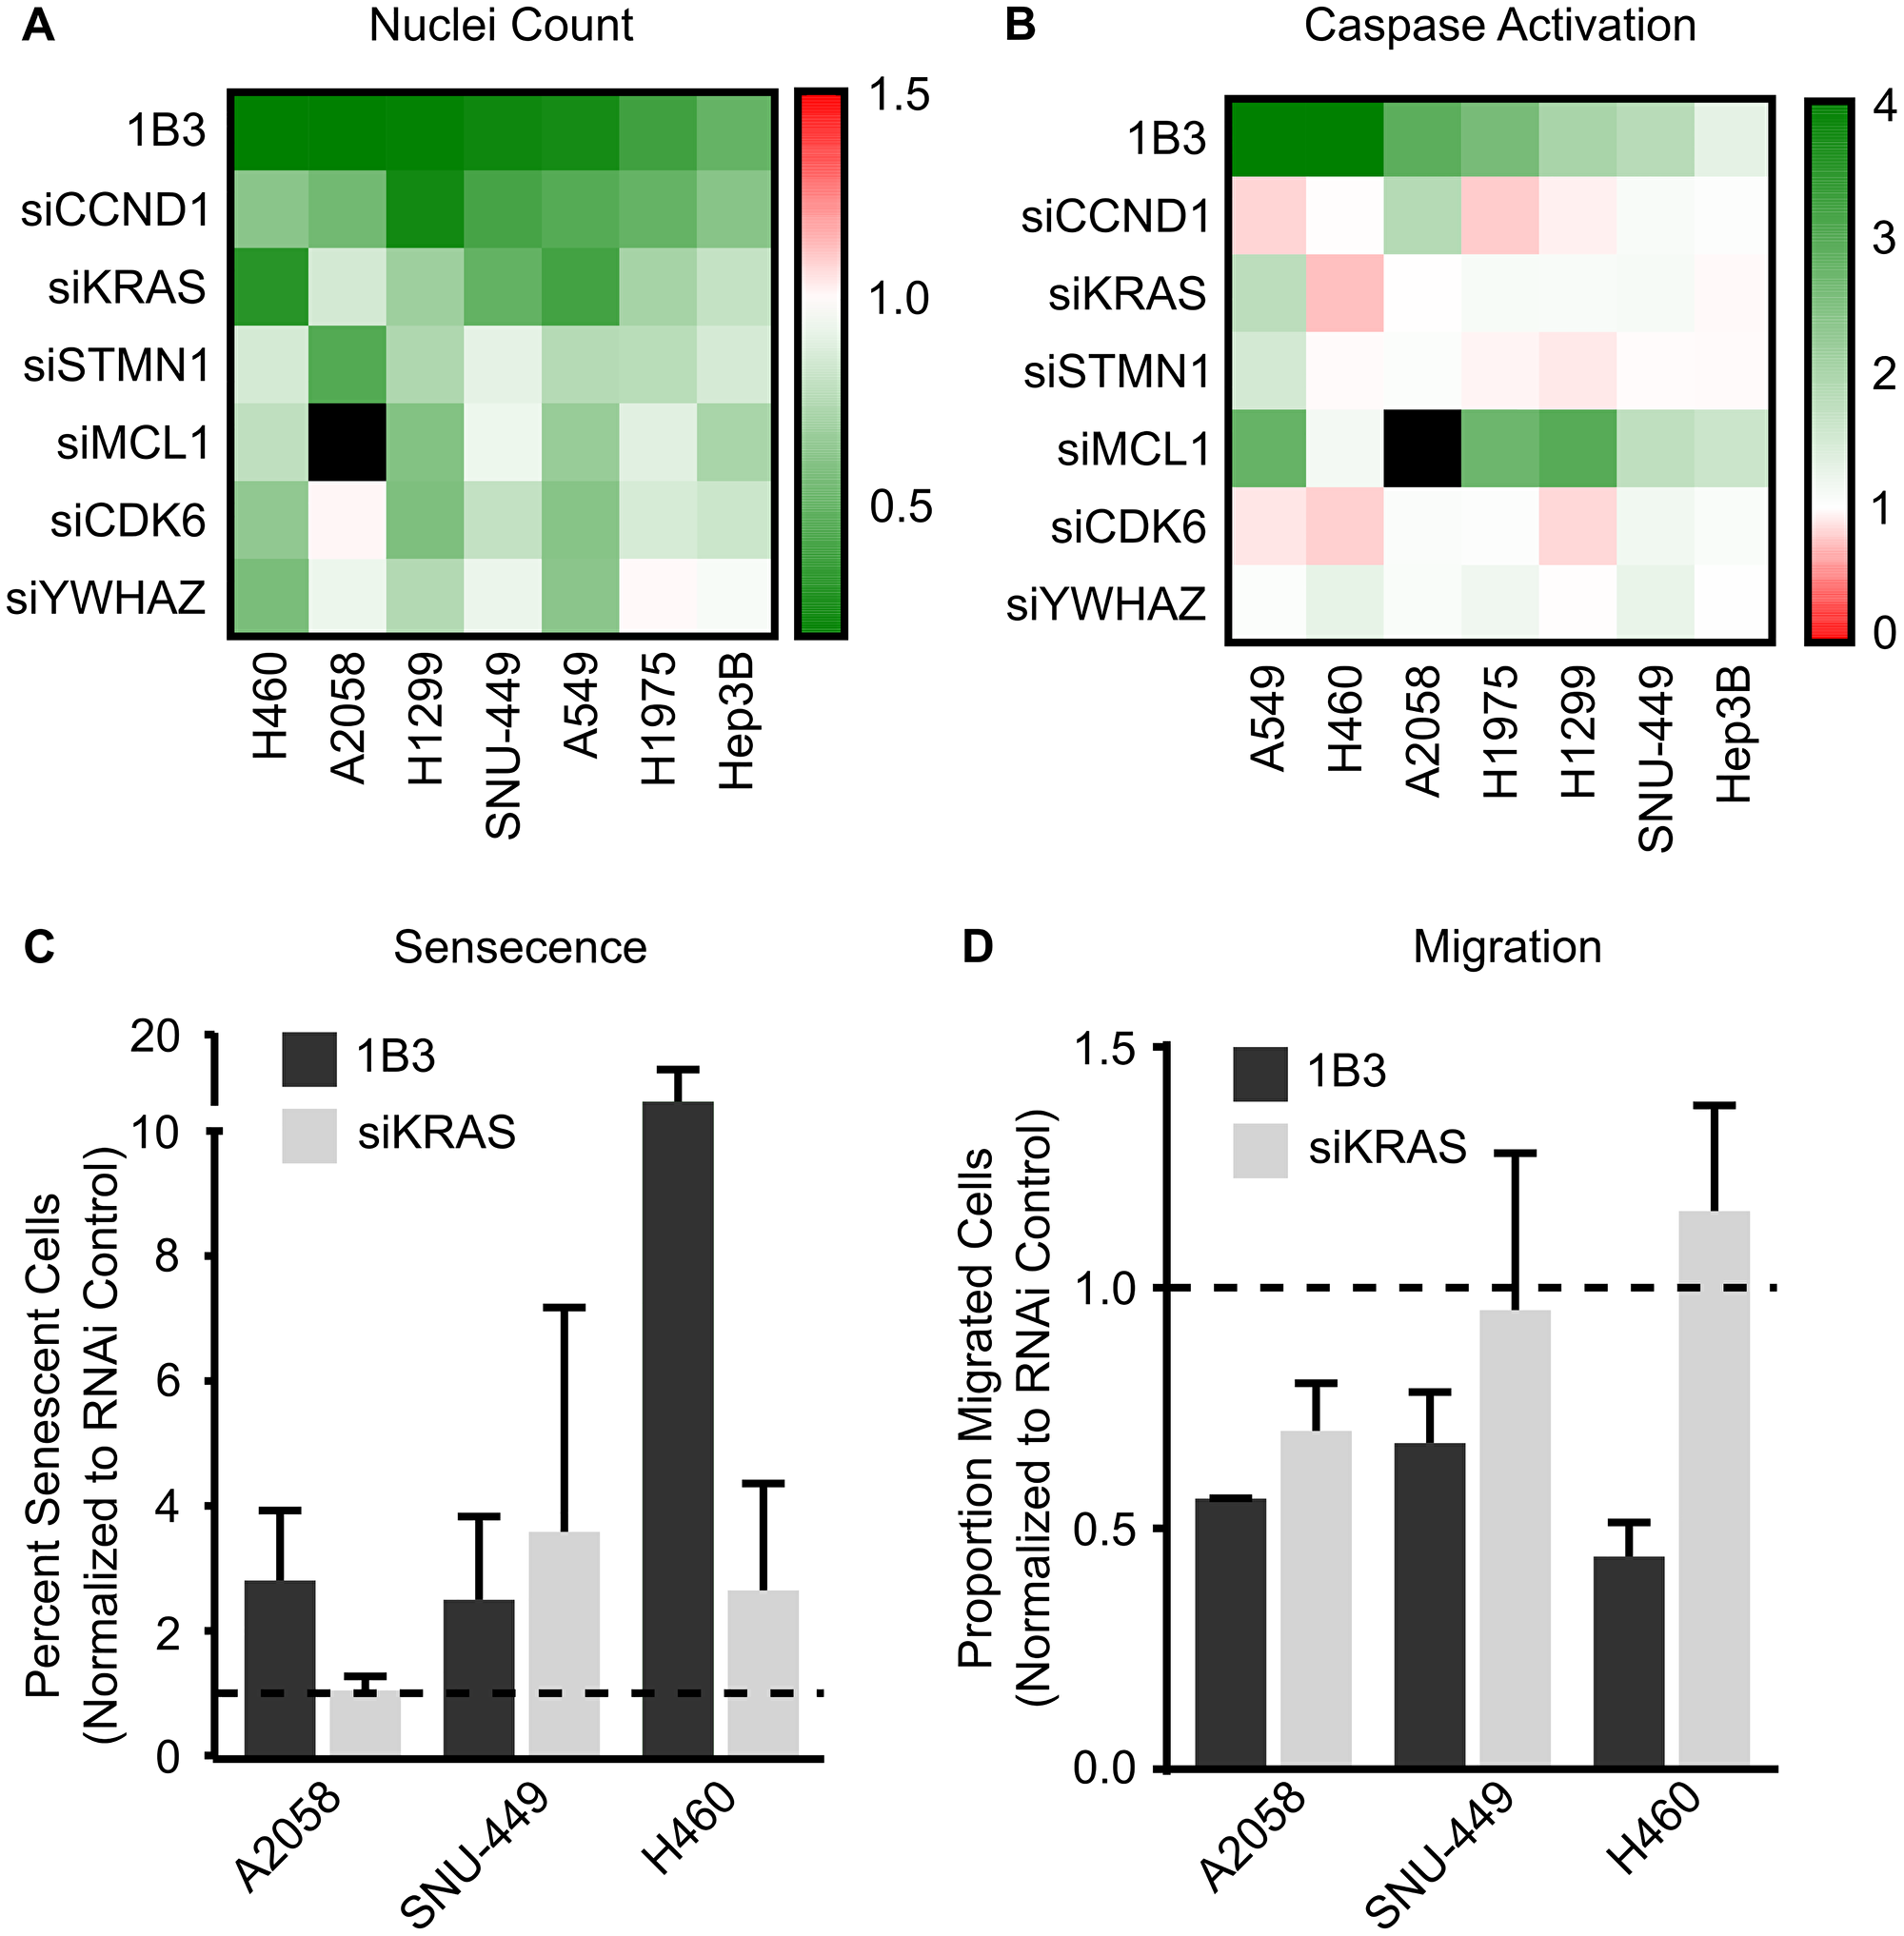 Effect of silencing individual 1B3 target gene expression on cell proliferation, apoptosis, senescence, and migration in a panel of human cancer cell lines.